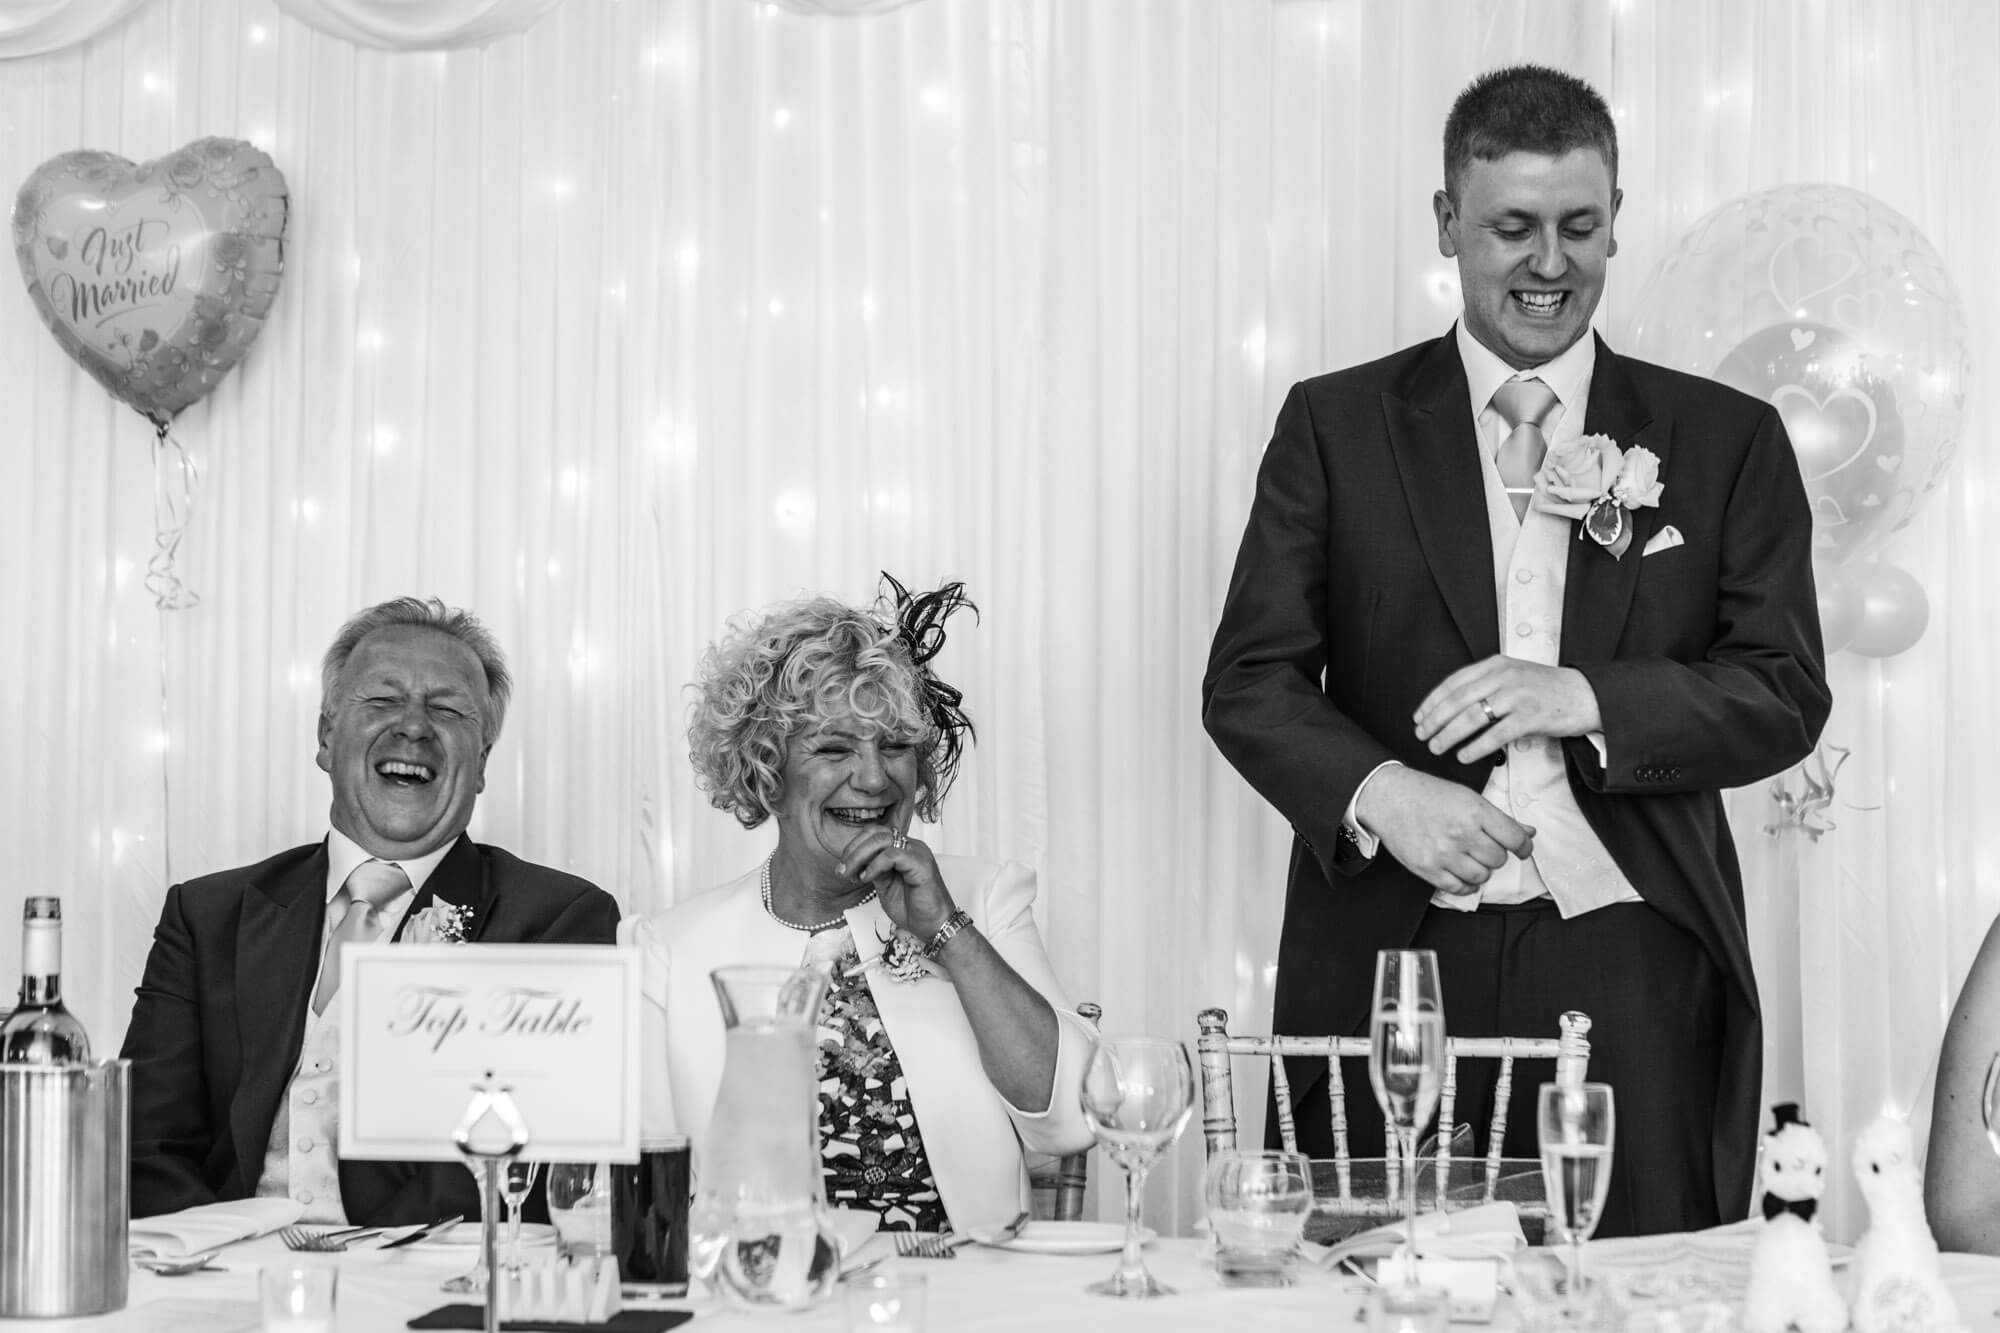 the parents of the groom laugh heartily as their son makes his wedding speech